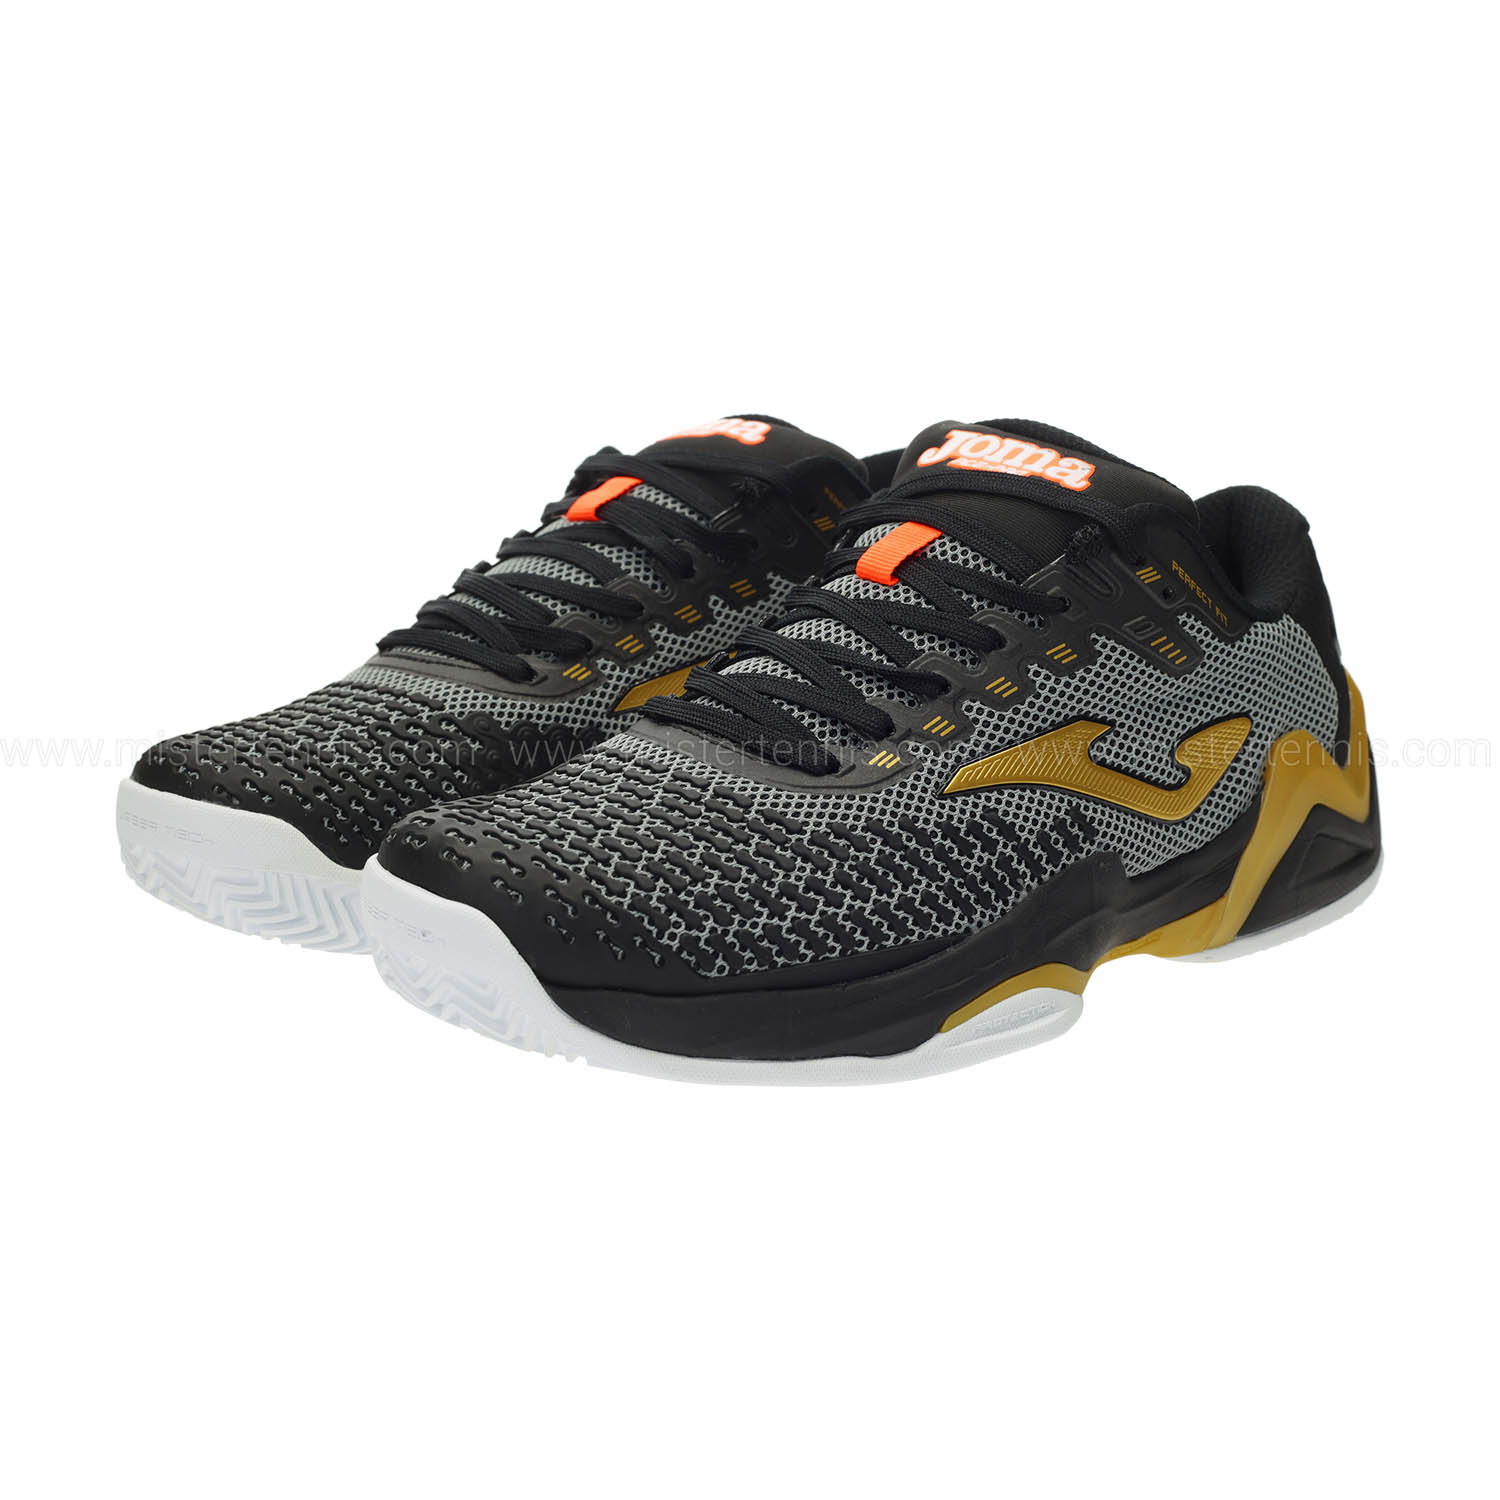 Joma Ace Clay Men's Tennis Shoes - Black/Gold